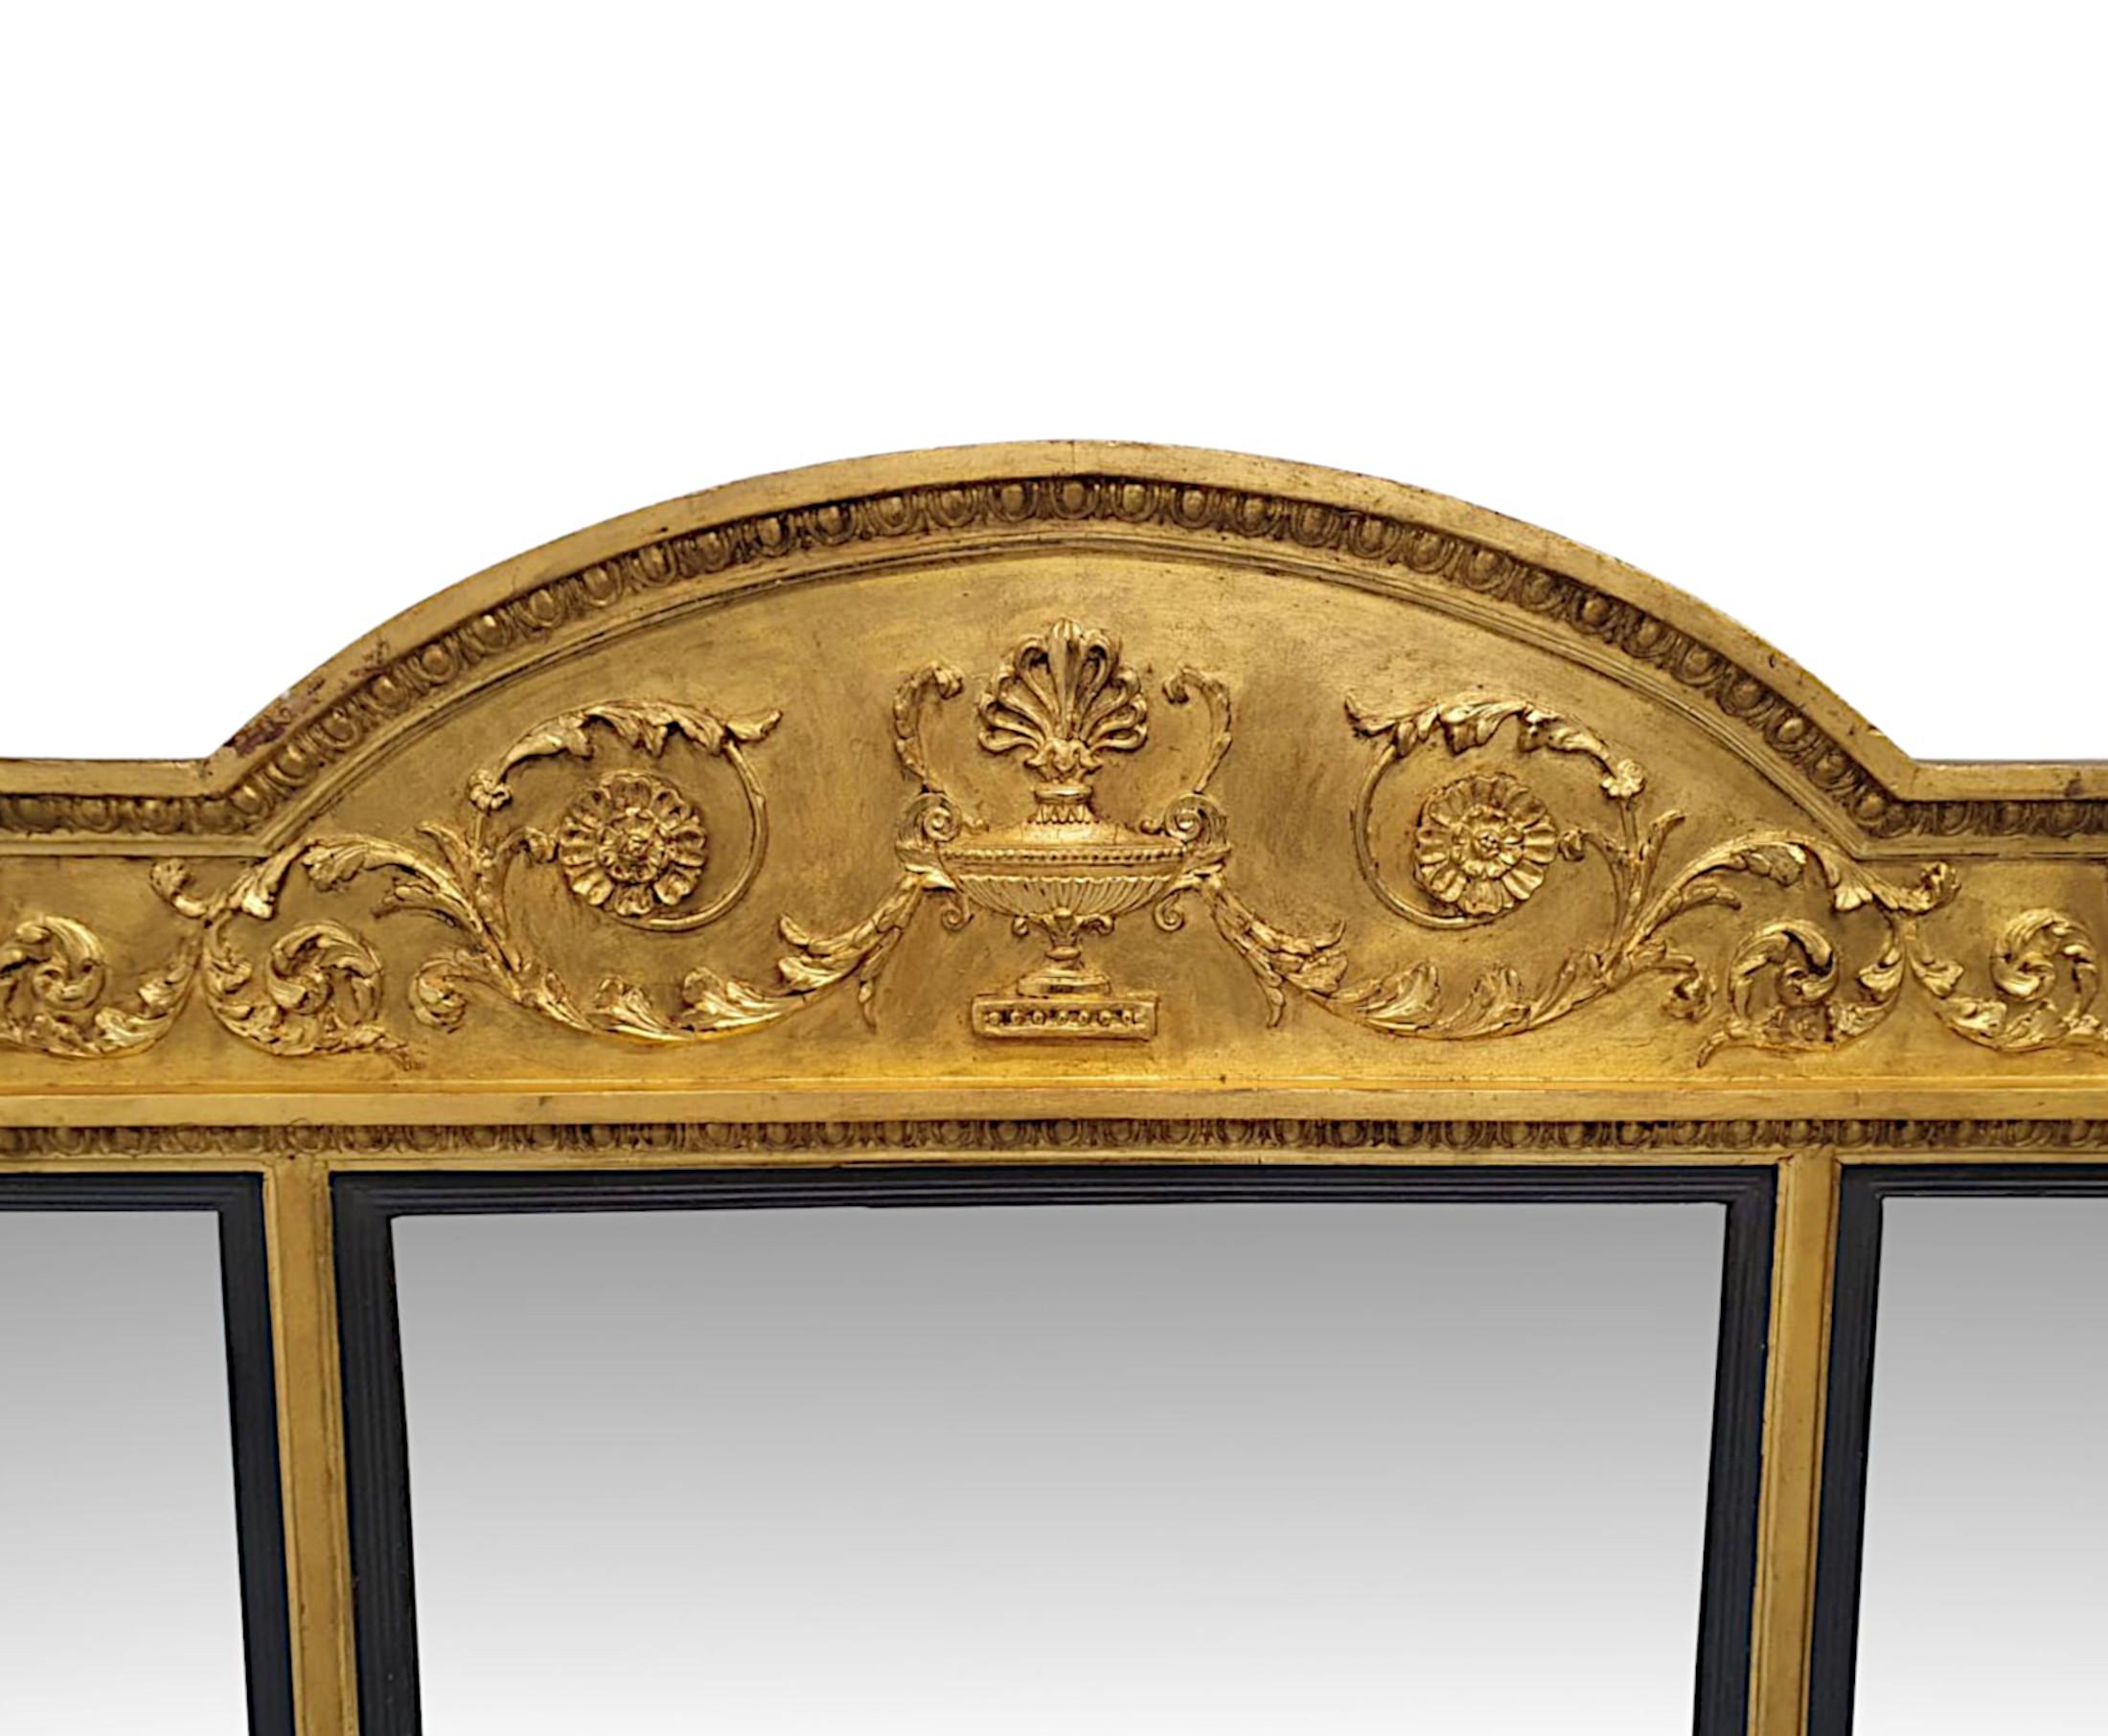 A fabulous late 19th Century giltwood overmantle compartmental mirror in the manner of Adams.  The finely hand carved, moulded and fluted giltwood frame with applied flowerhead paterae, egg and dart detail throughout is surmounted curved